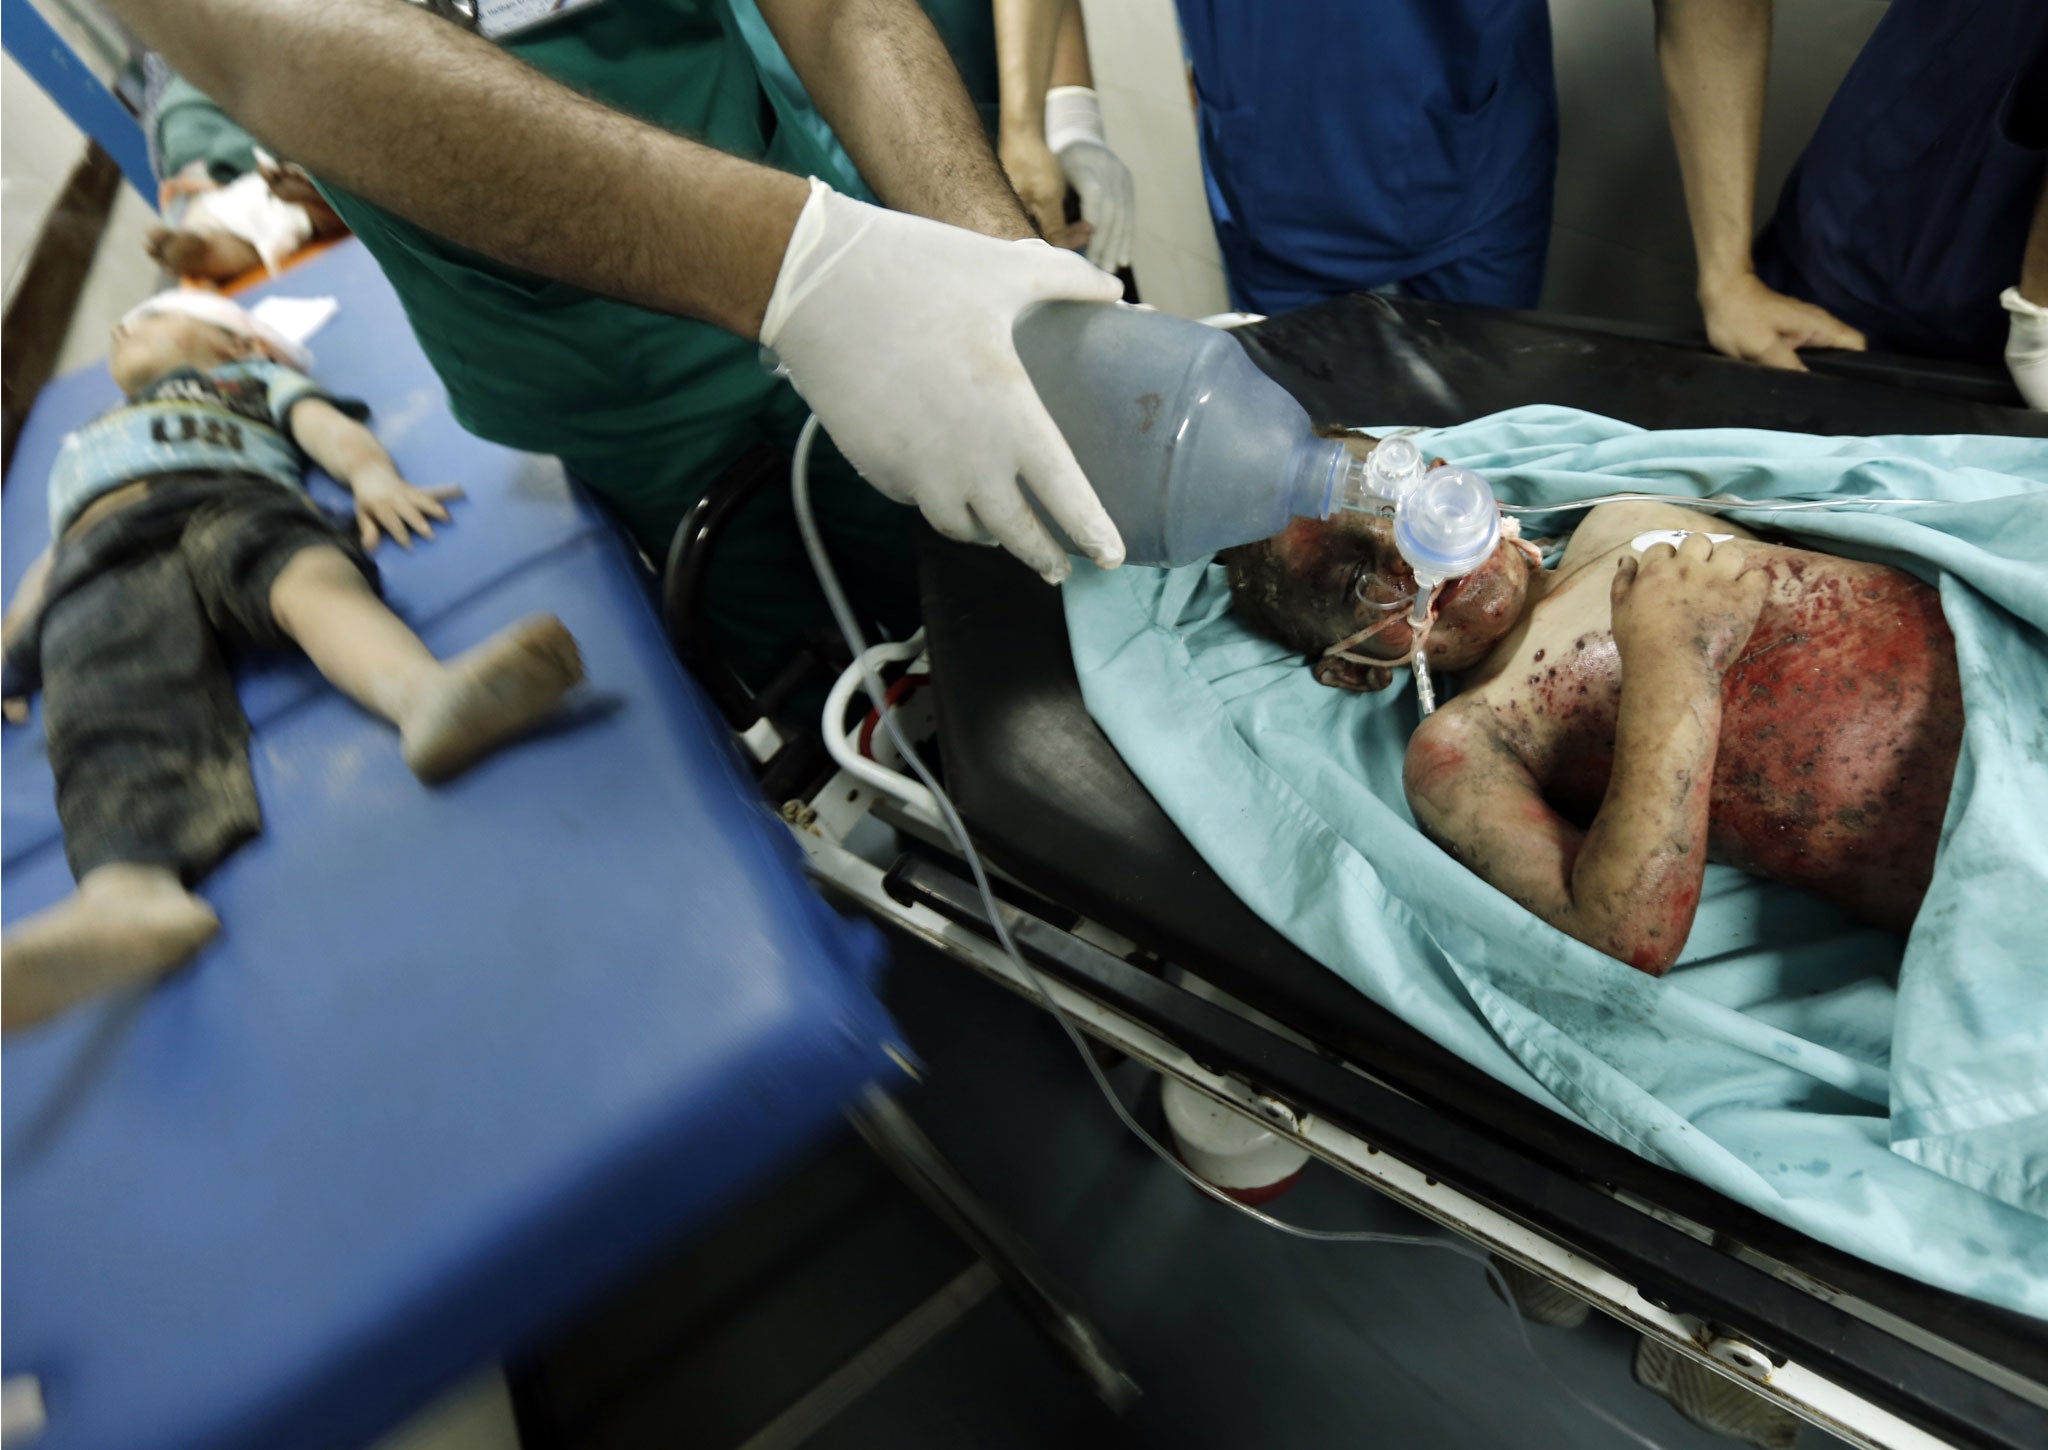 Palestinian children, wounded in an Israeli air strike on the al-Shati refugee camp, lie on stretchers as they are treated at the al-Shefa hospital in Gaza City, on August 4, 2014